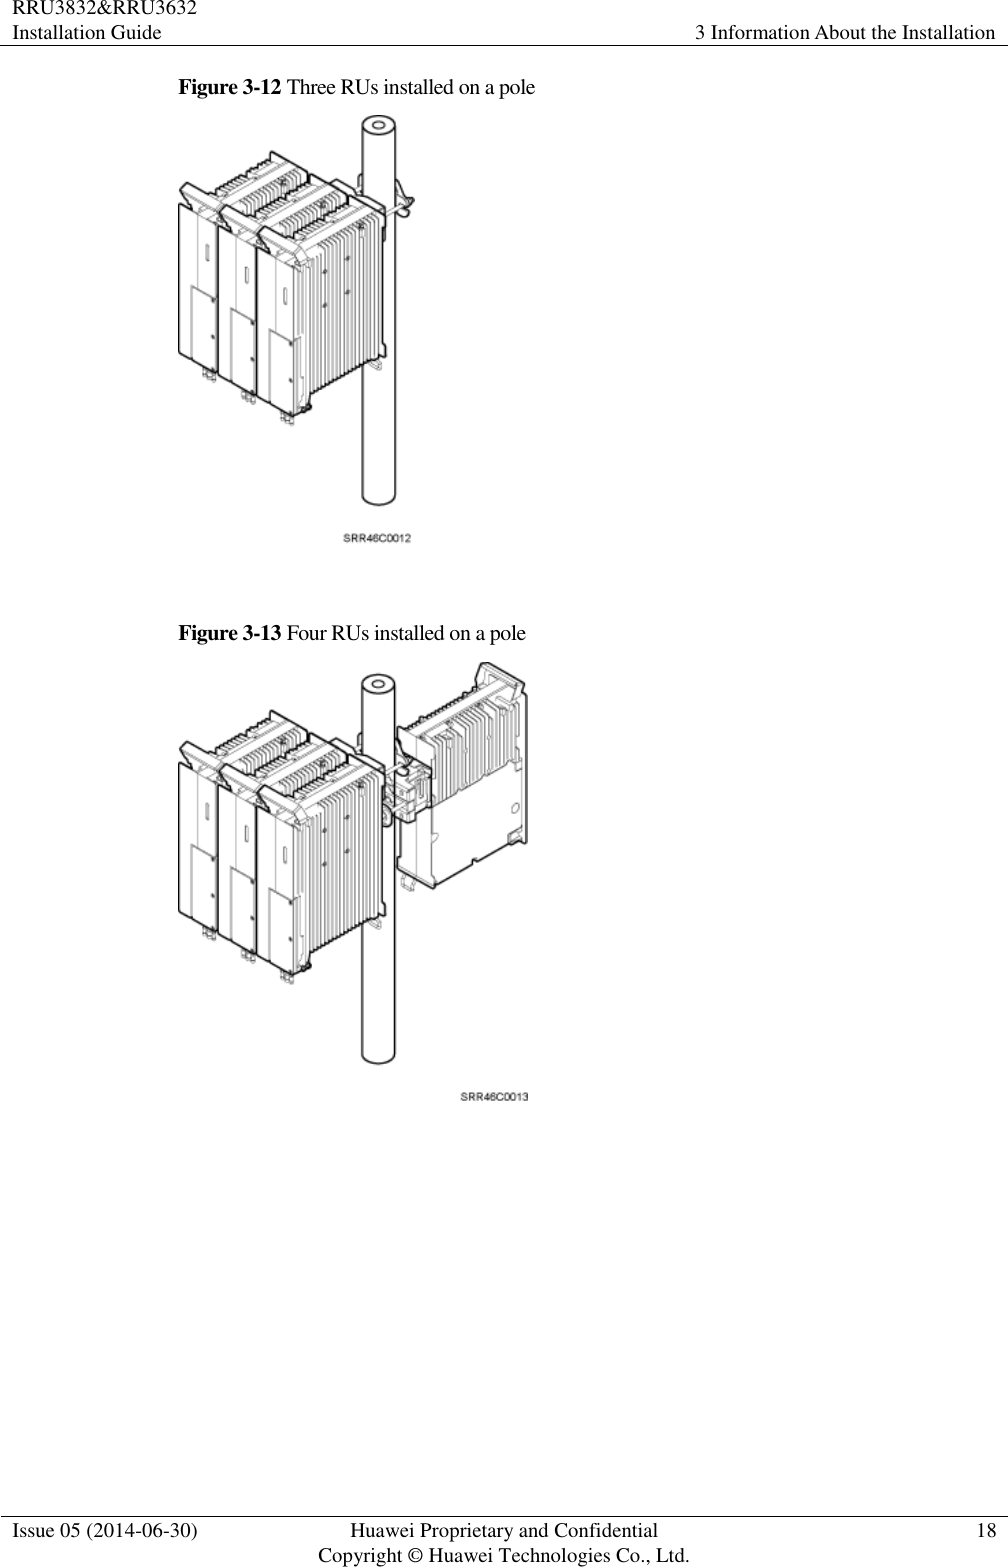 RRU3832&amp;RRU3632 Installation Guide 3 Information About the Installation  Issue 05 (2014-06-30) Huawei Proprietary and Confidential                                     Copyright © Huawei Technologies Co., Ltd. 18  Figure 3-12 Three RUs installed on a pole   Figure 3-13 Four RUs installed on a pole   